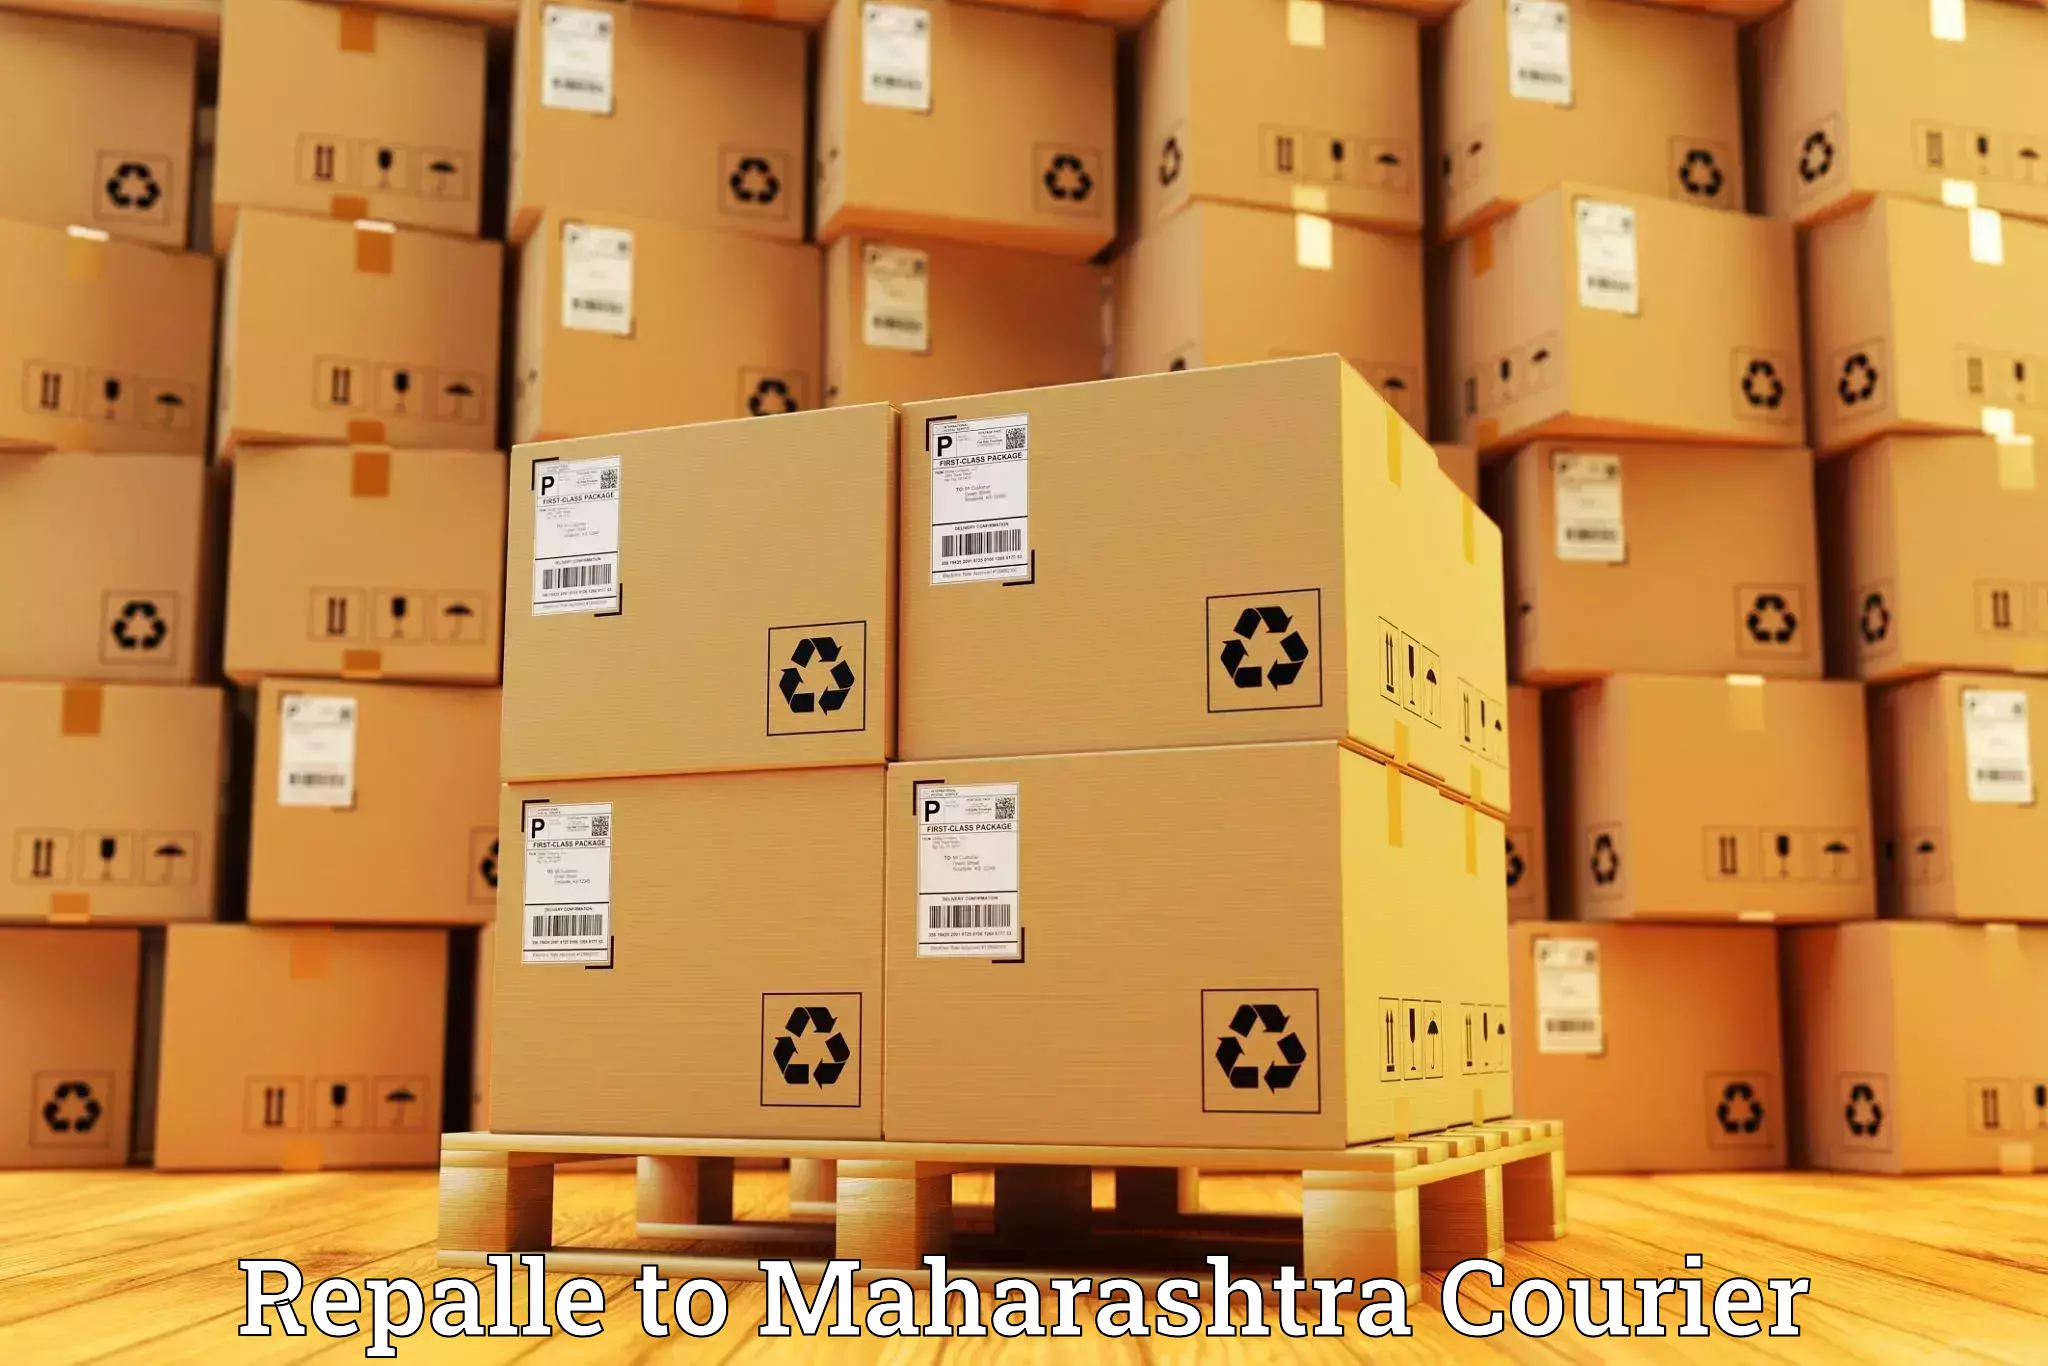 Baggage transport scheduler in Repalle to Maharashtra